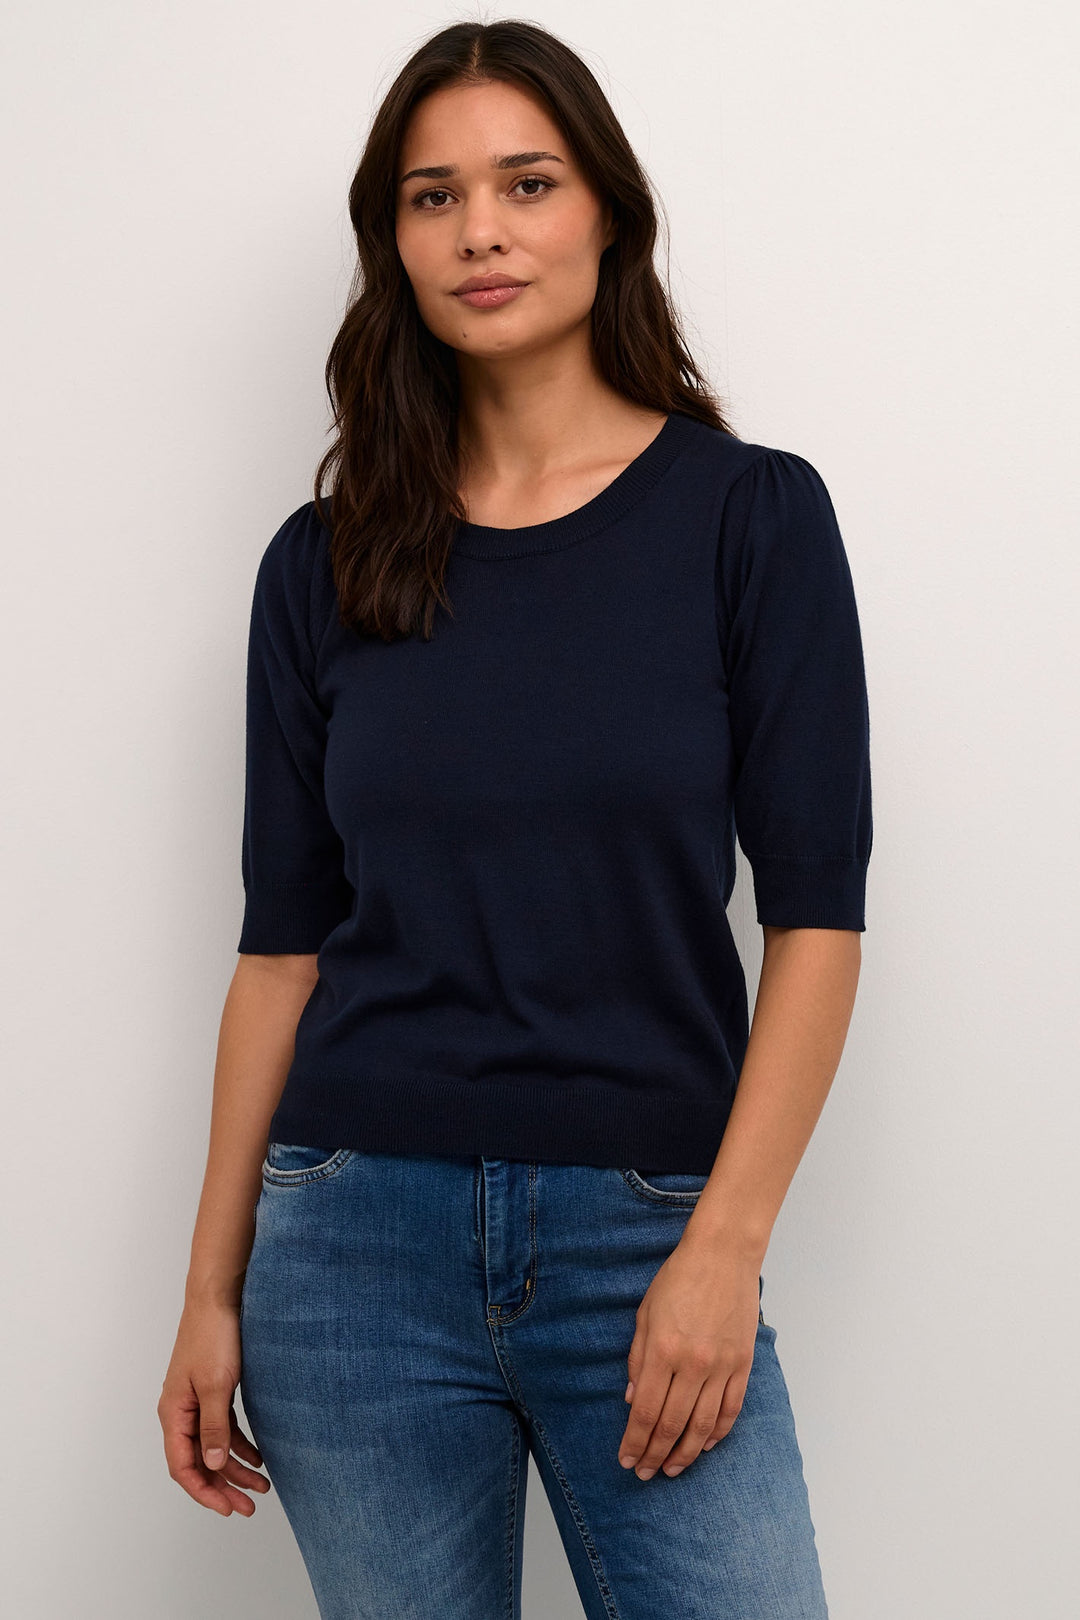 Culture 50110474 CUannemarie Salute Navy Short Sleeve Round Neck Jumper - Dotique Chesterfield